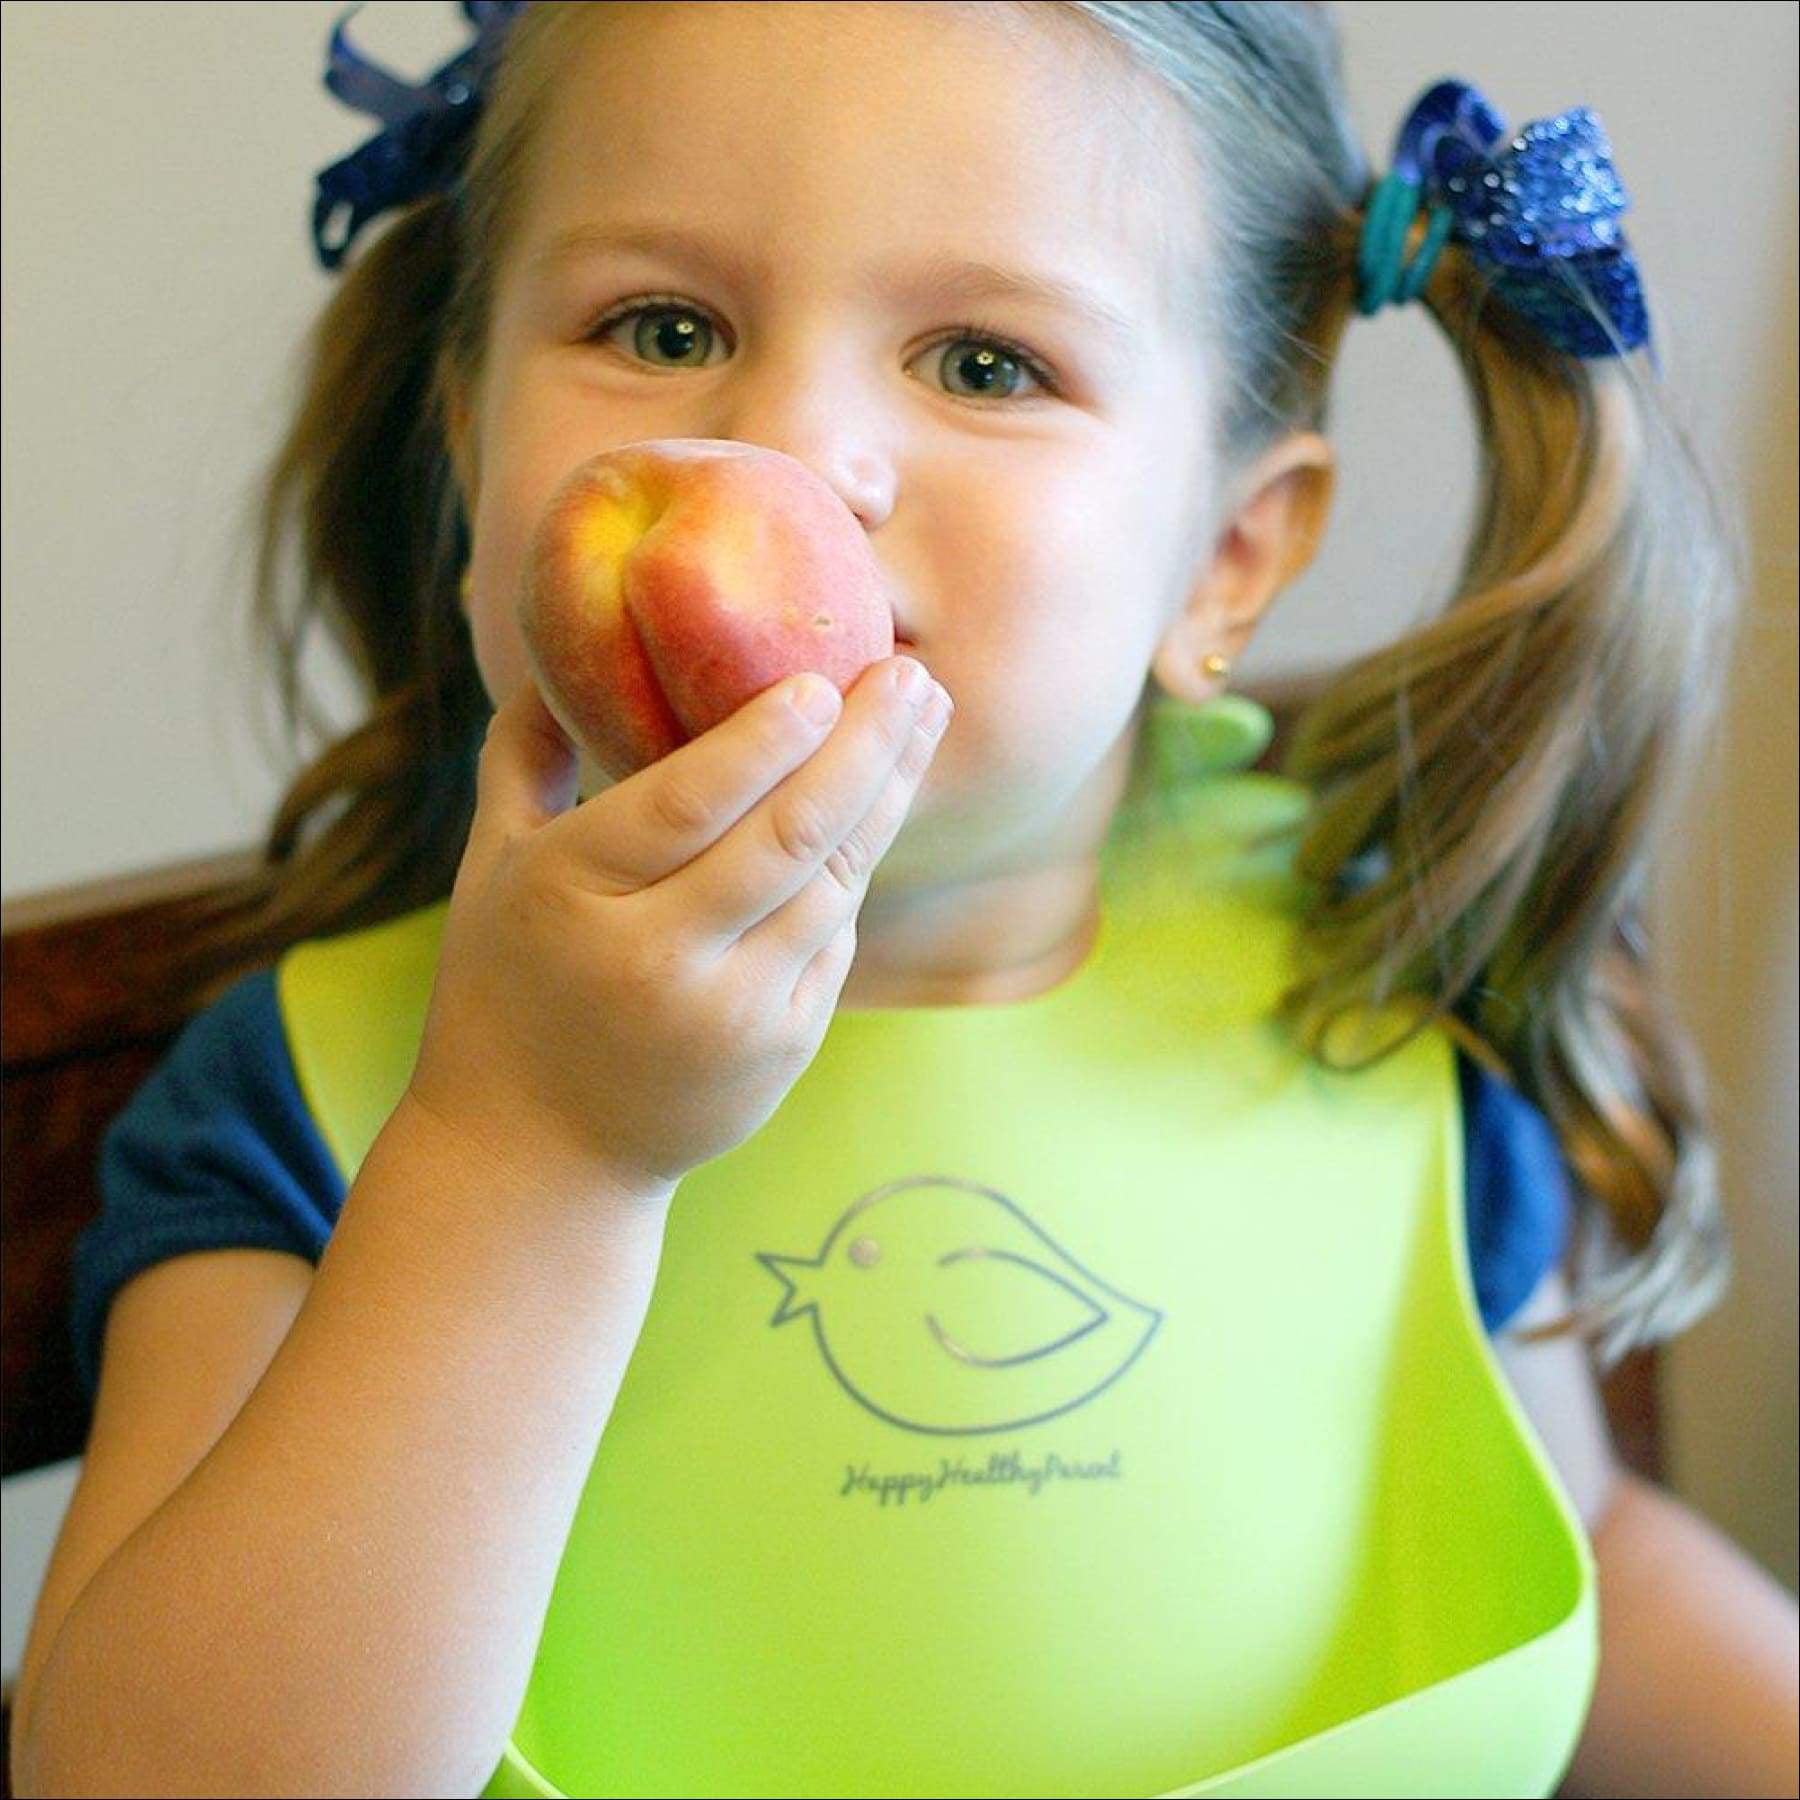 Easy Clean up 2 Pack Silicone Baby Bibs Easily Wipe Clean for Babies & Toddlers Waterproof 6-72 Months Soft,BPA Free Keeps Stains Off Green Whale